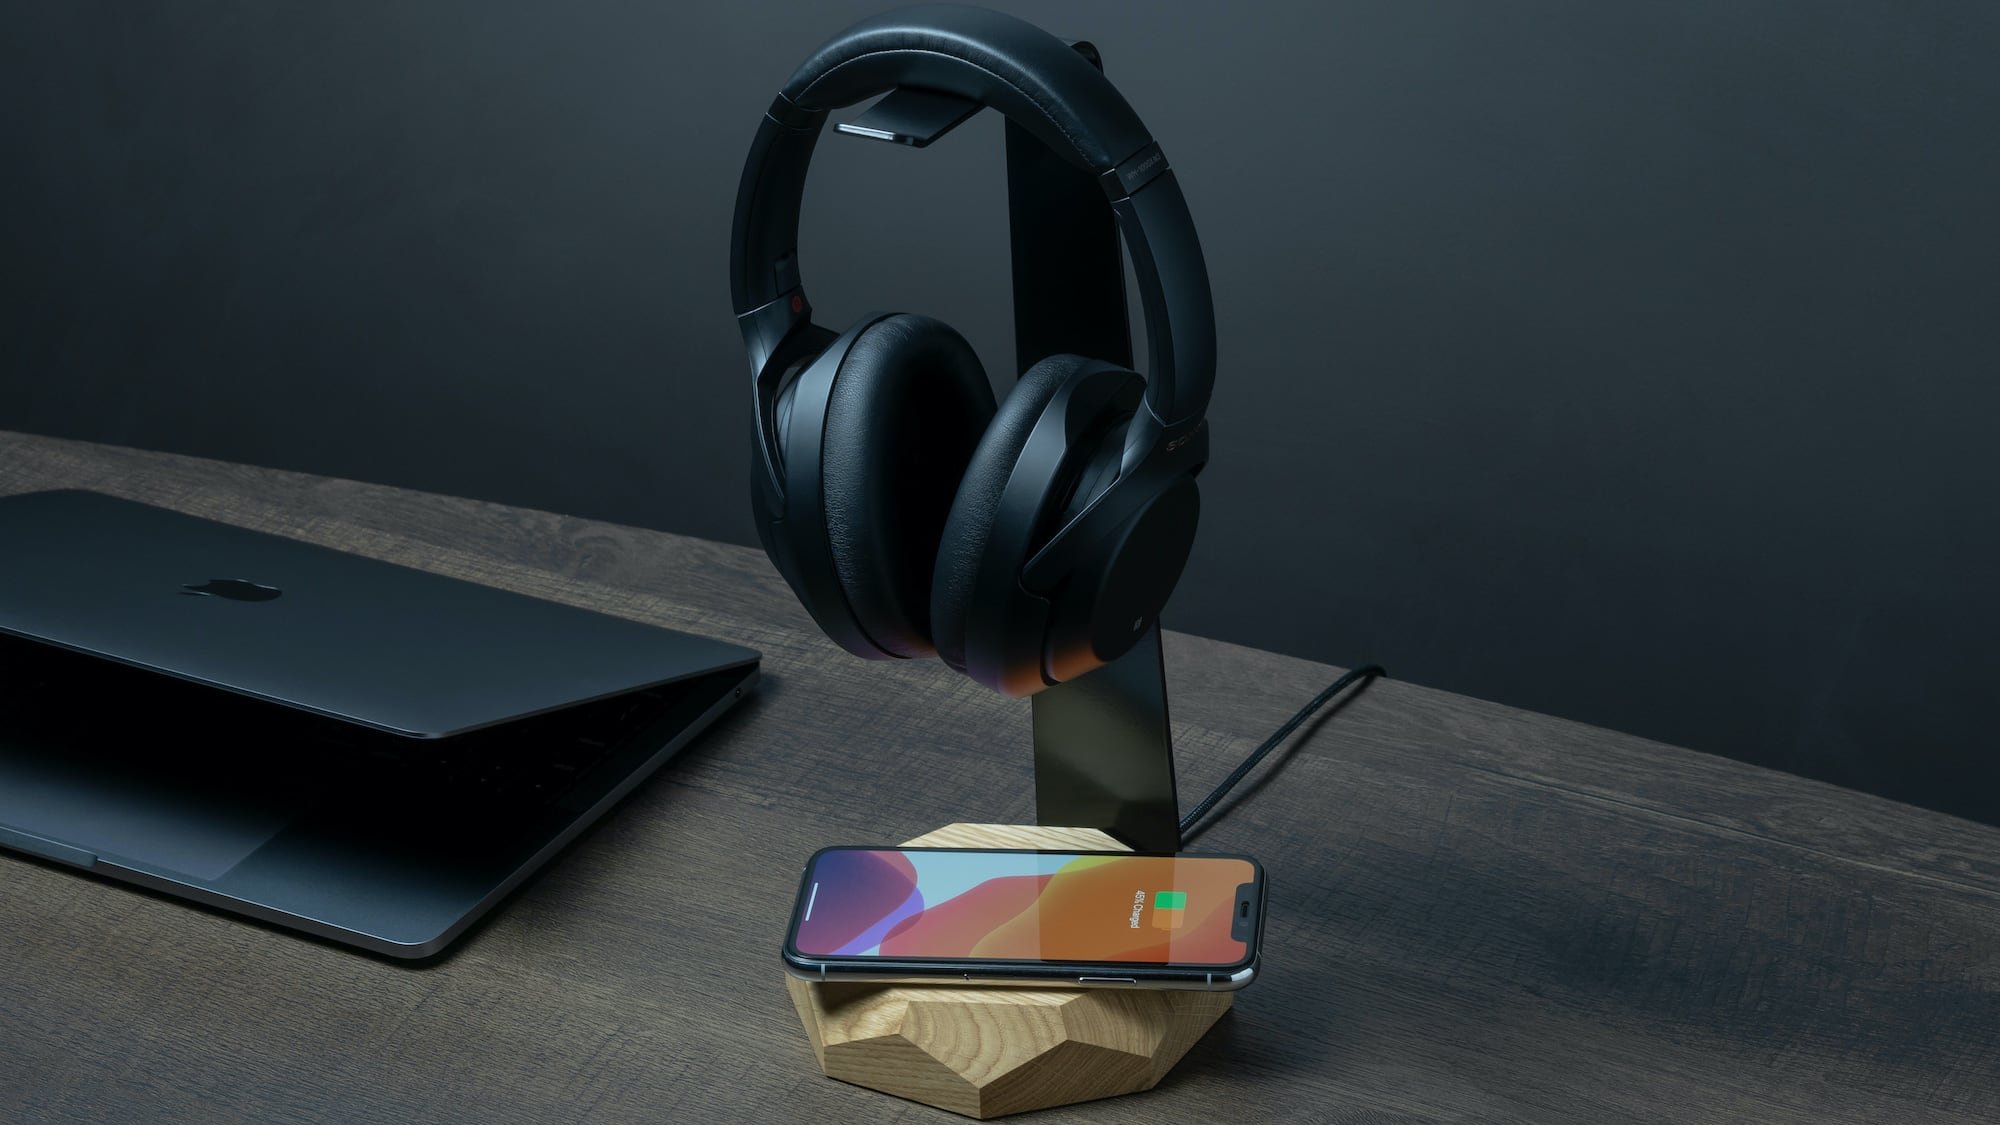 Oakywood 2-in-1 Headphone Stand and Charger offers up to 10W of power to all Qi devices